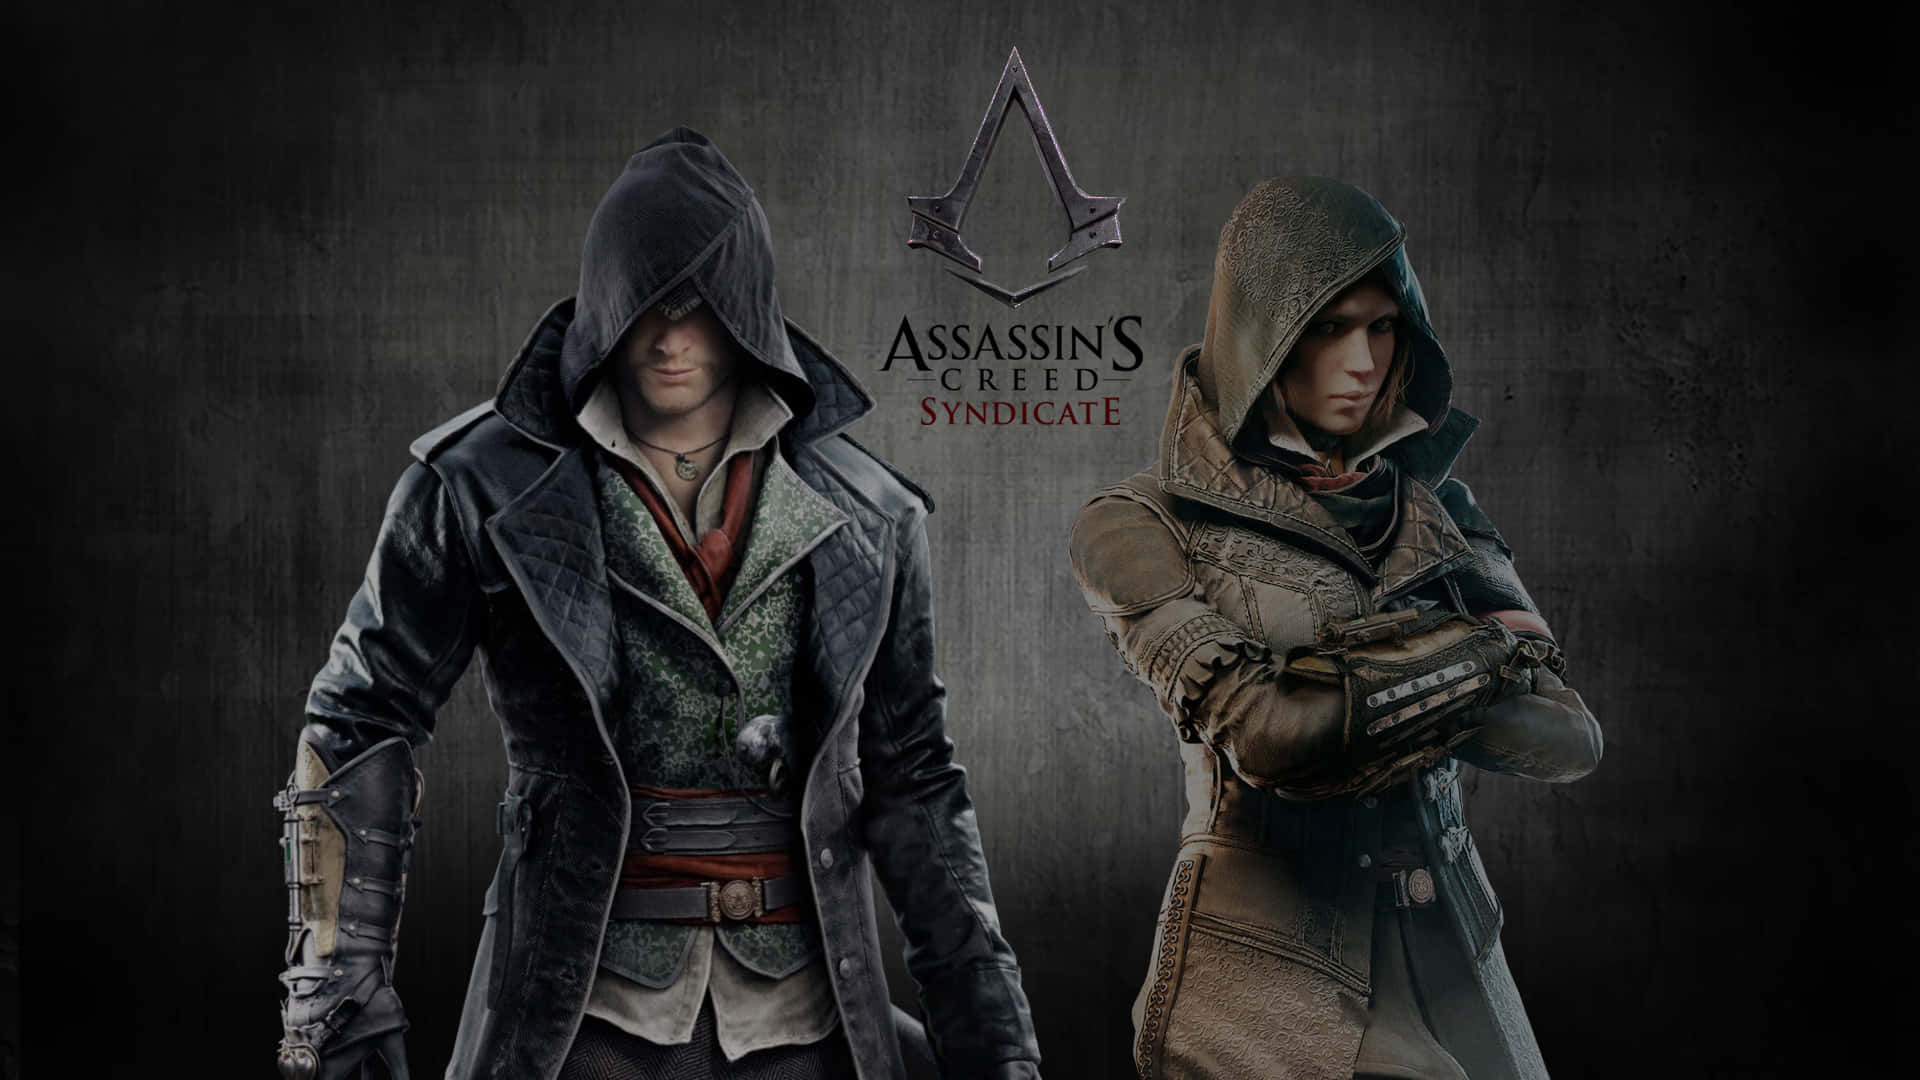 Evie Frye - Assassin's Creed Syndicate Wallpaper